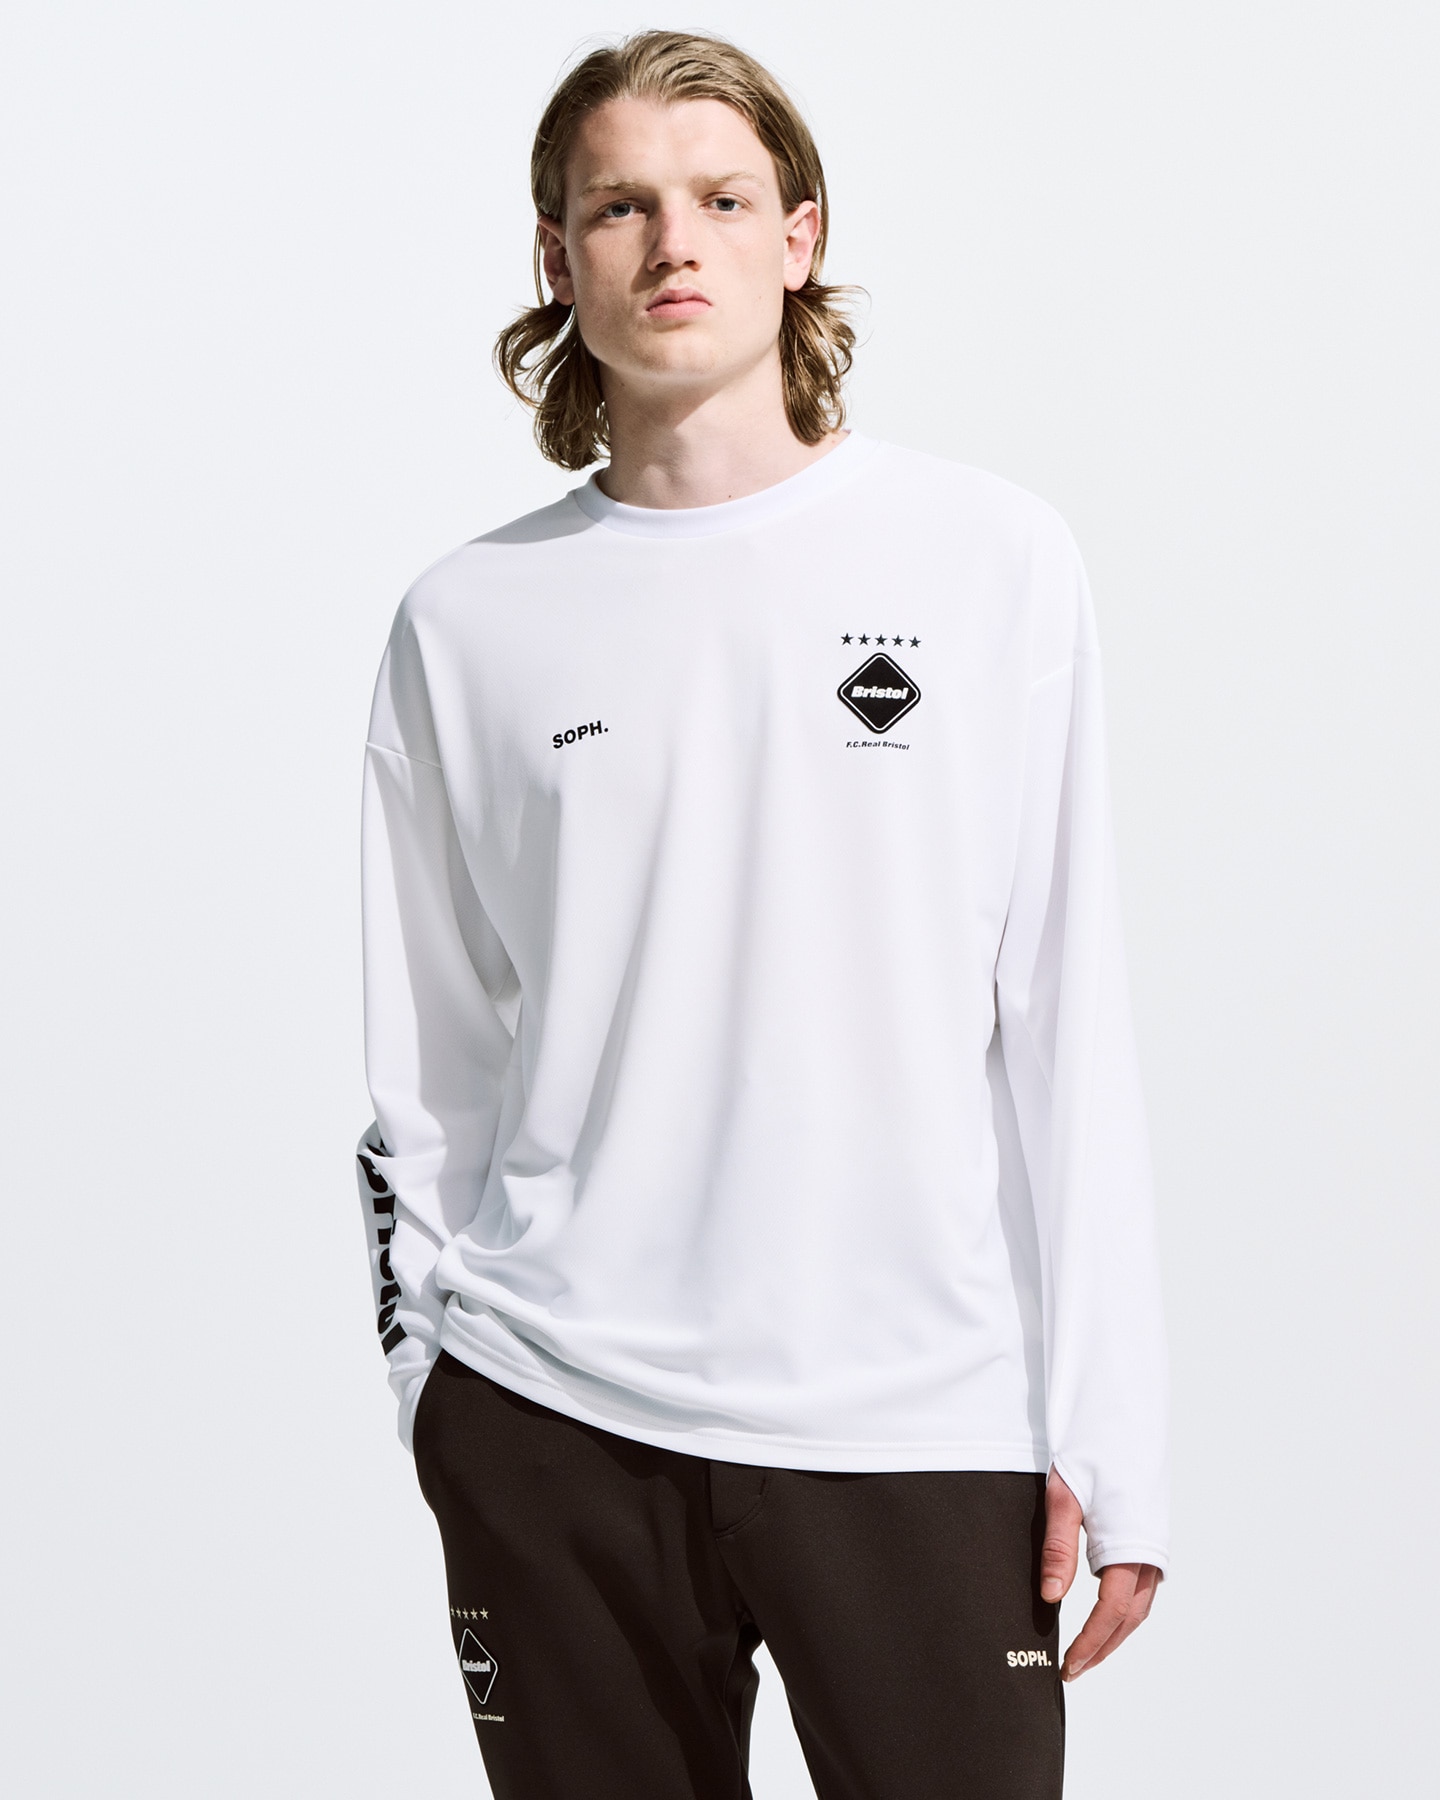 FCRB L/S TEAM PRACTICE TOP 定価最終値下げカラーブラウン - T